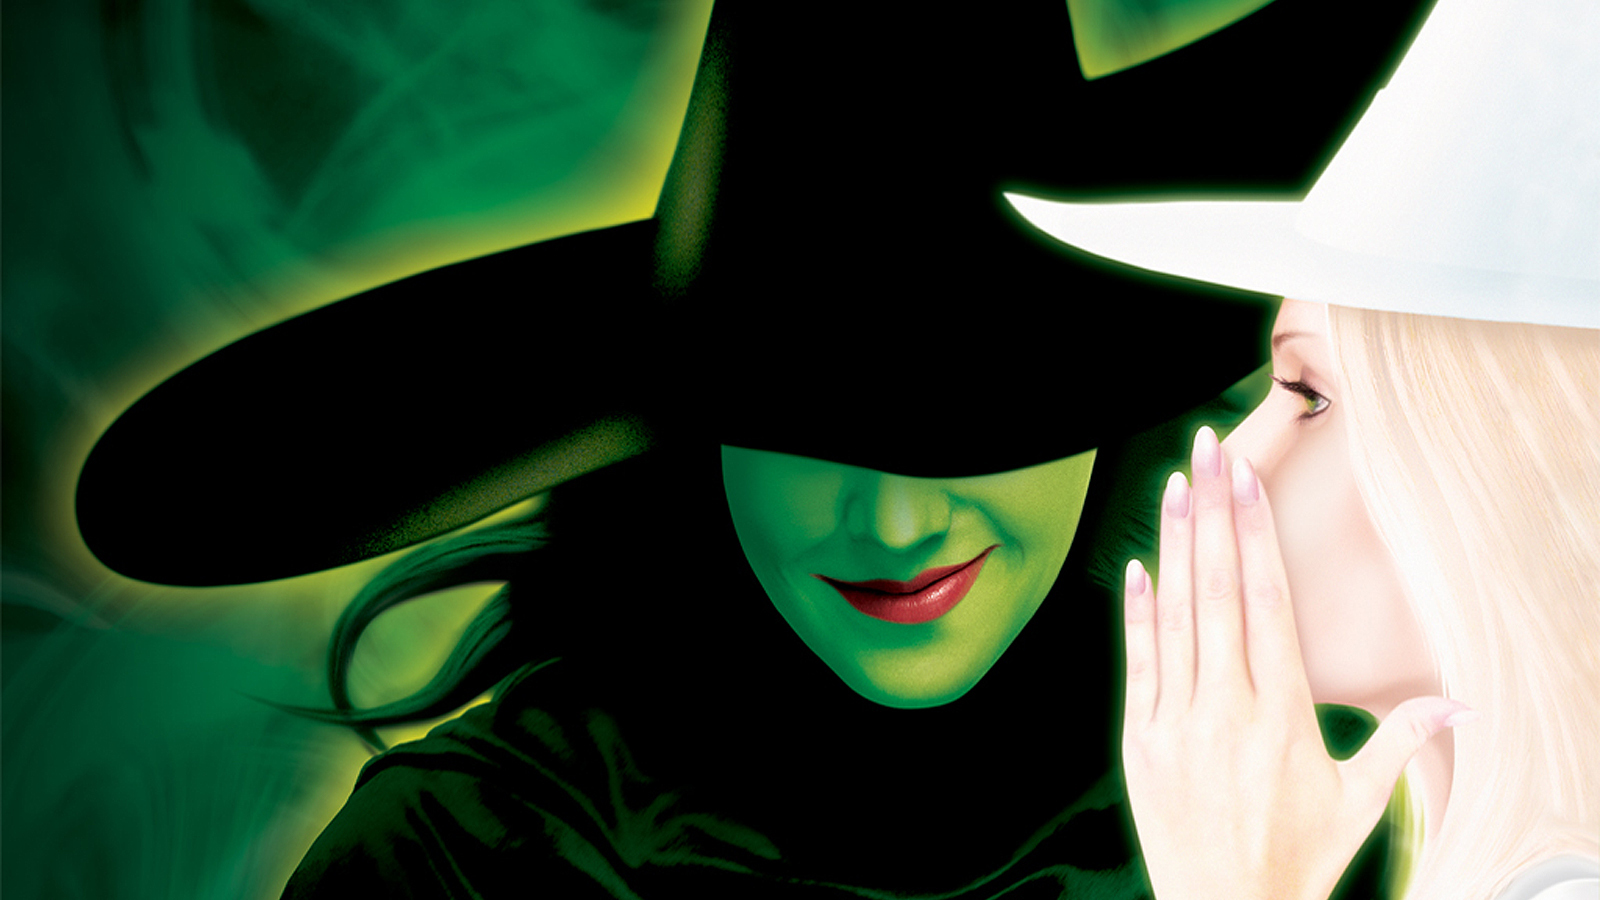  Wallpaper on Wicked The Musical Hd Wallpaper   General   384021